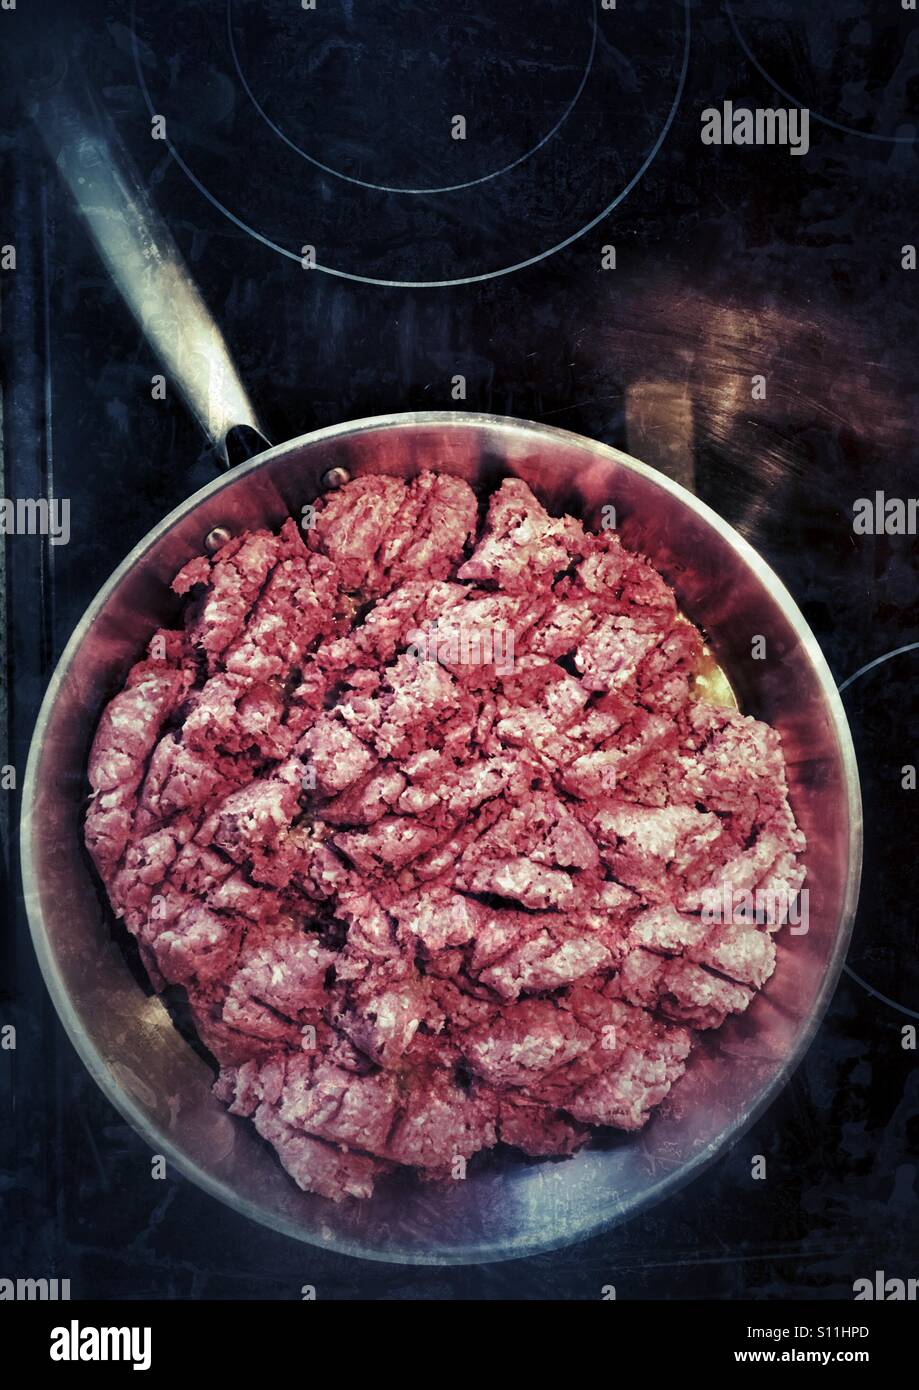 Frying pan on stove full of ground beef Stock Photo